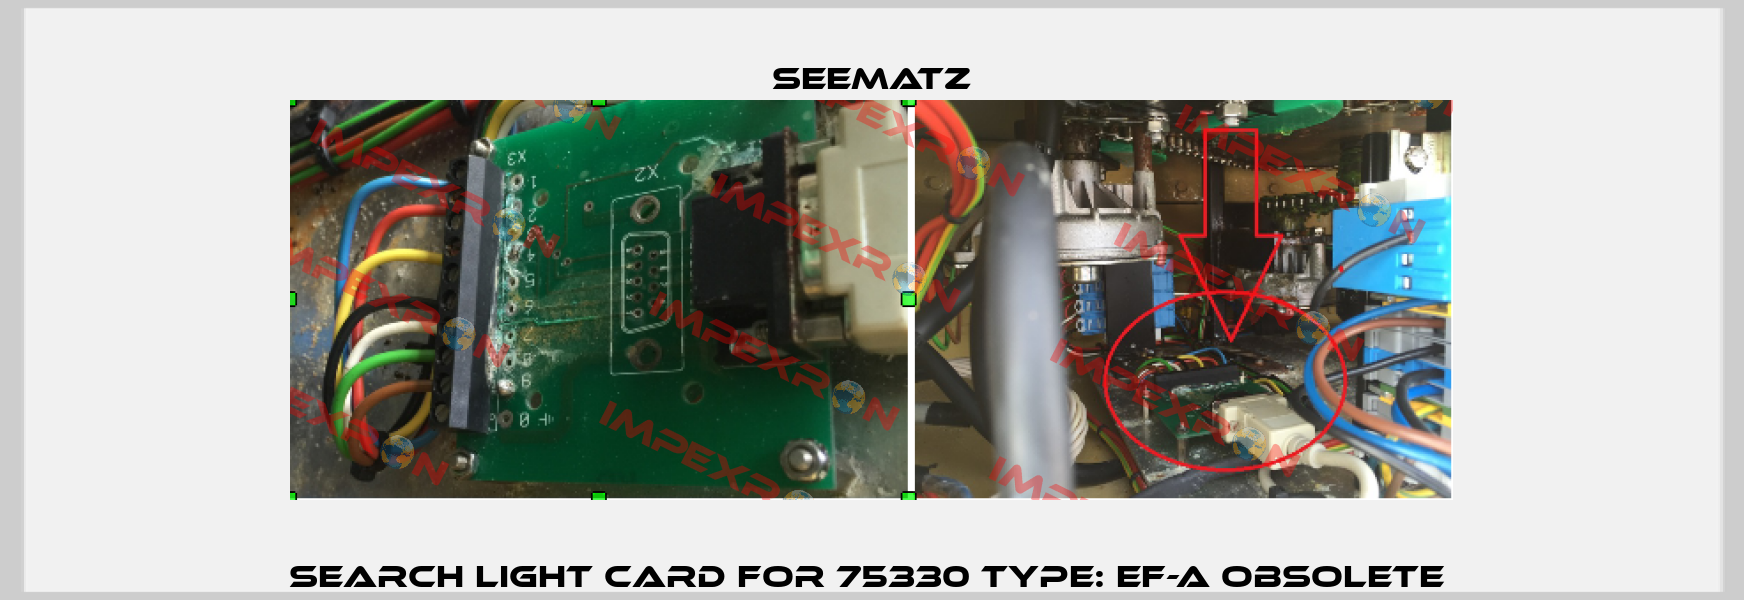 Search light card for 75330 TYPE: EF-A obsolete  Seematz